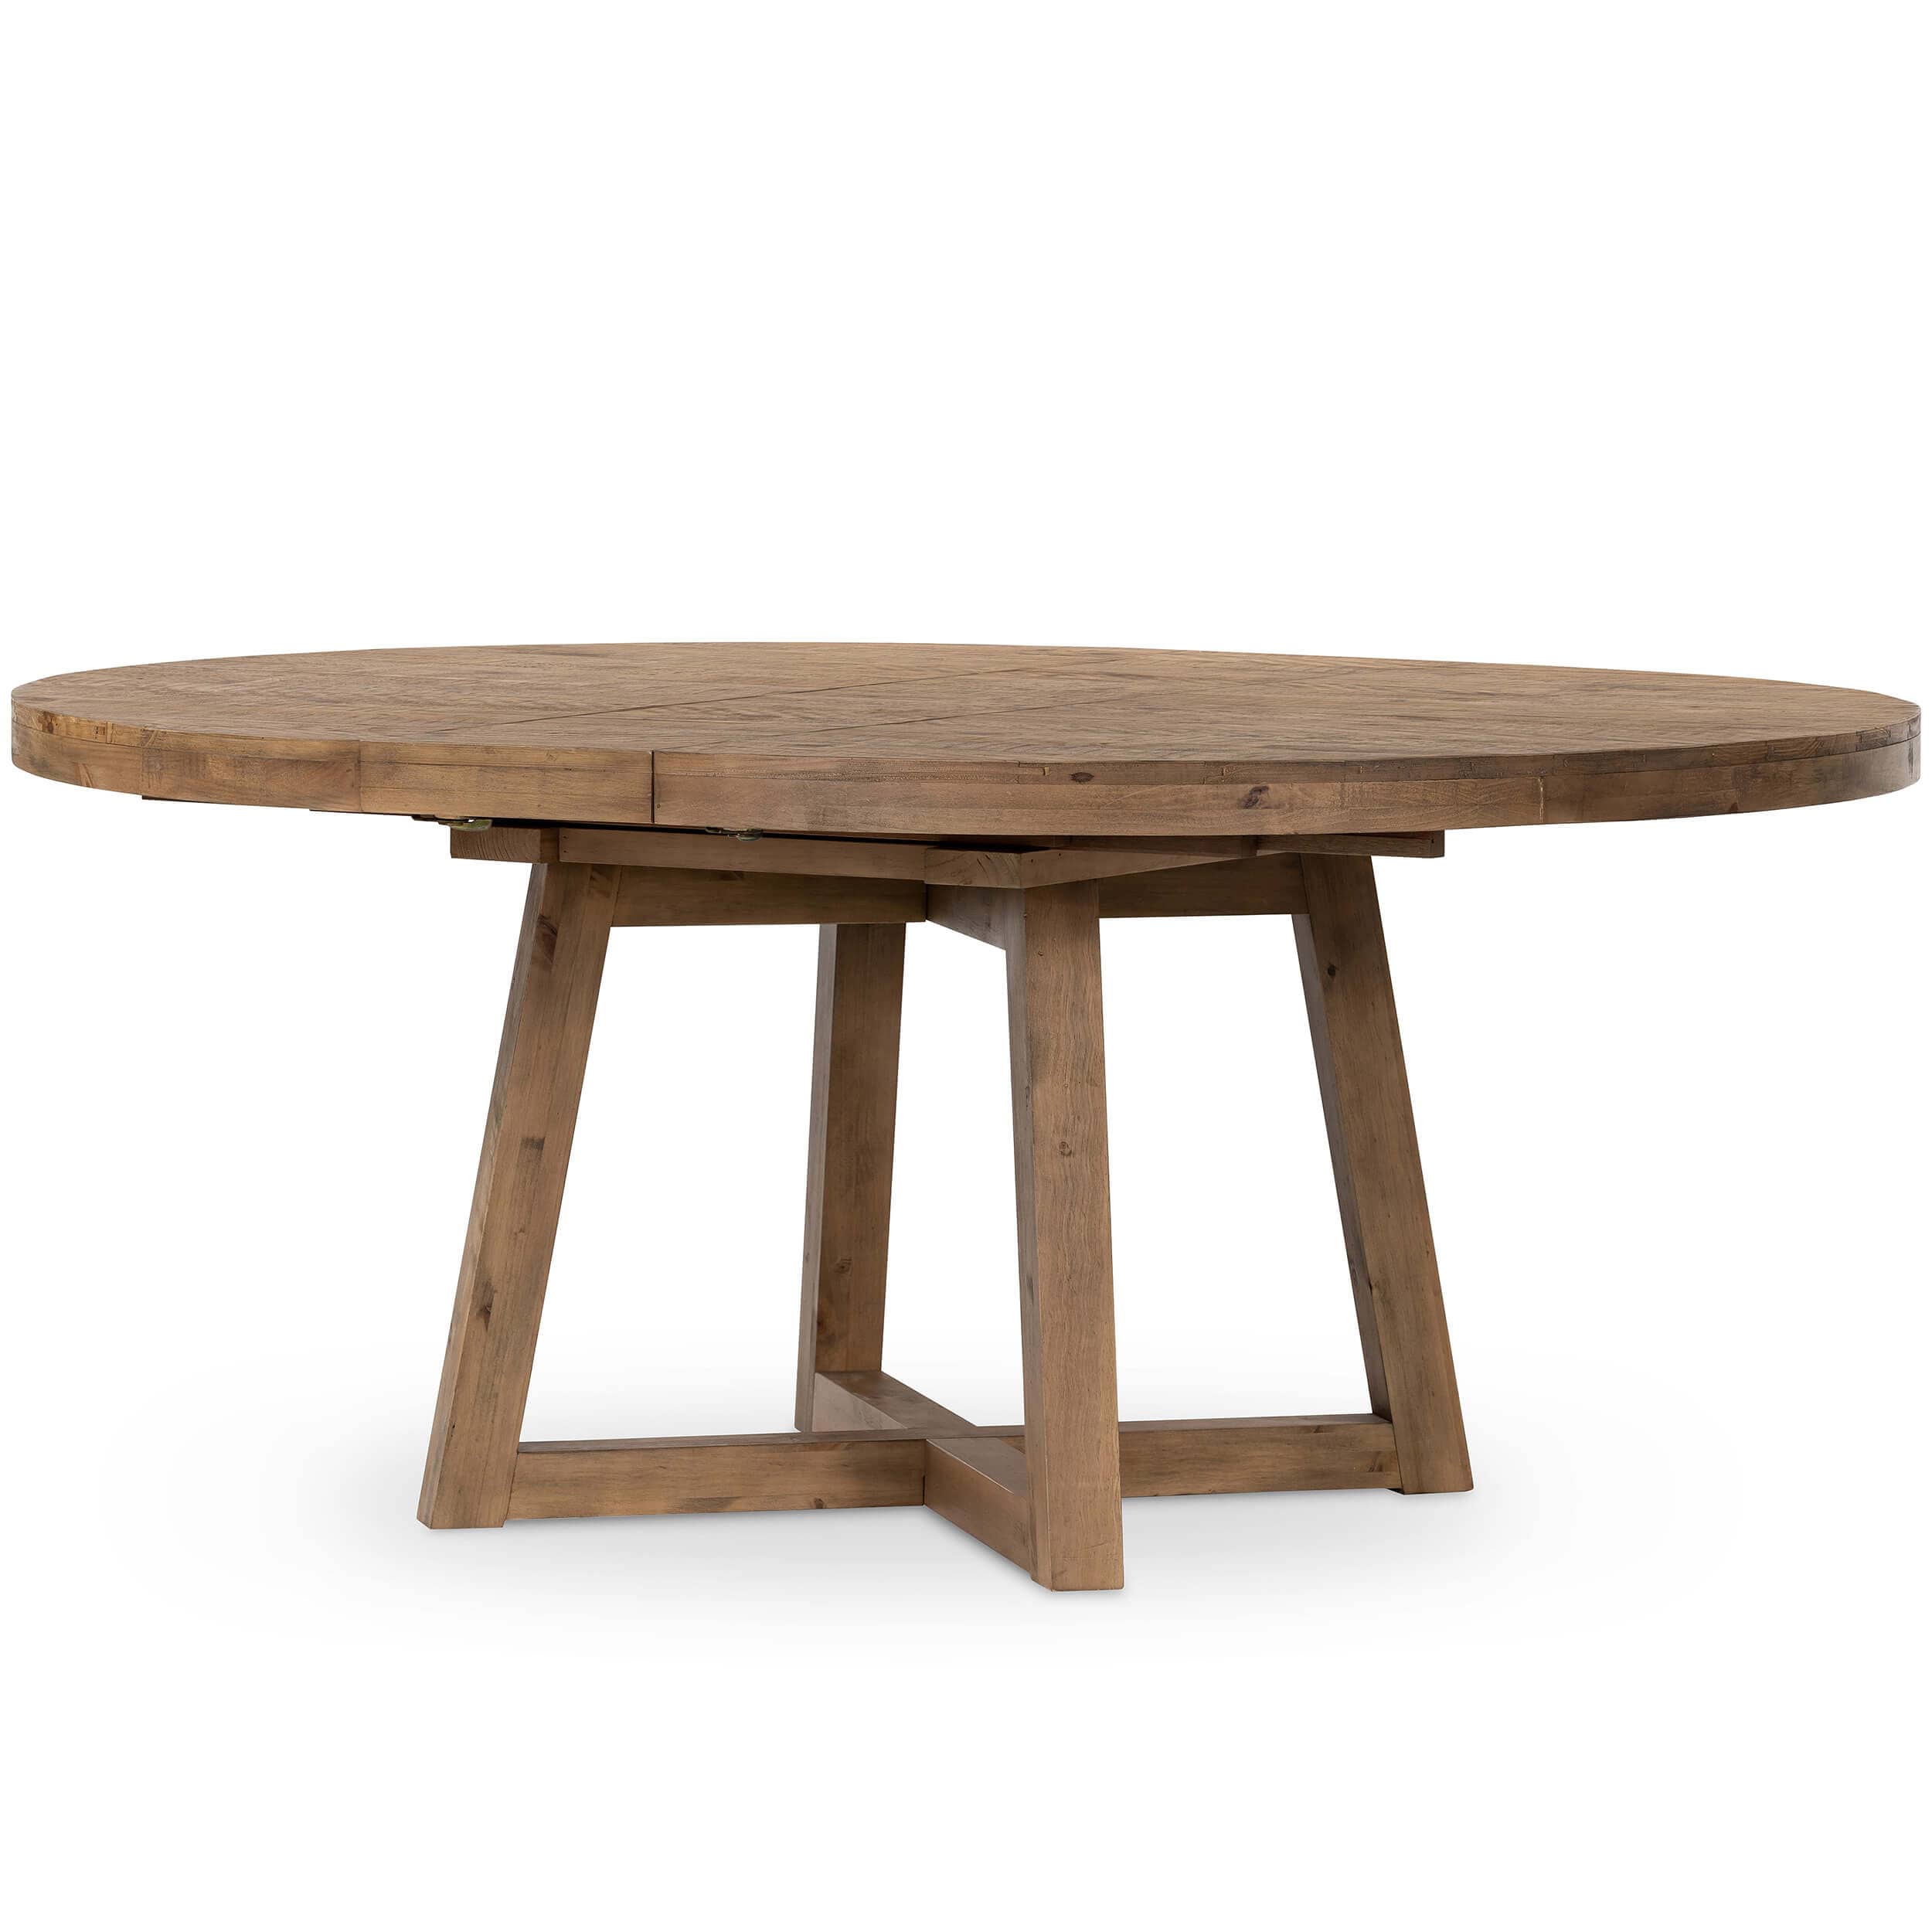 Image of Eberwin Round Extension Dining Table, Rustic Natural